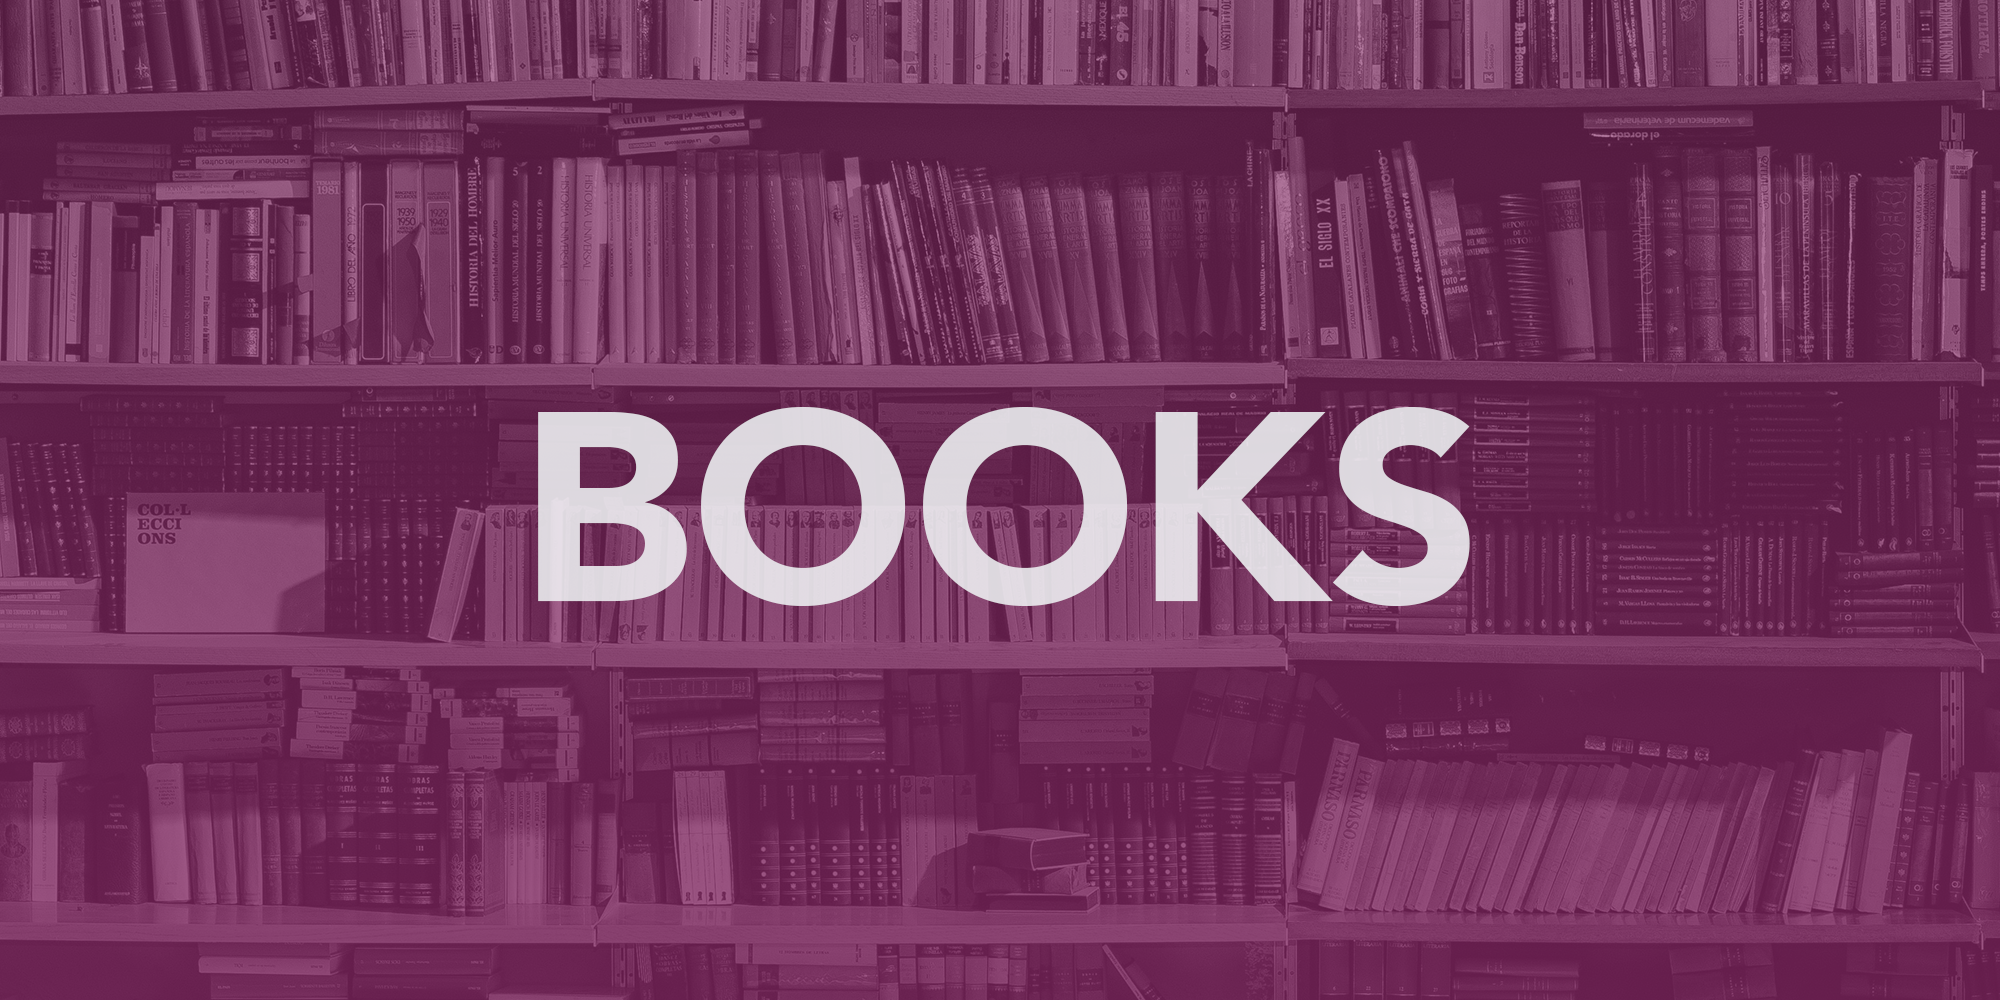 Purple image with the text "BOOKS" in the center with books on a bookshelf in the background